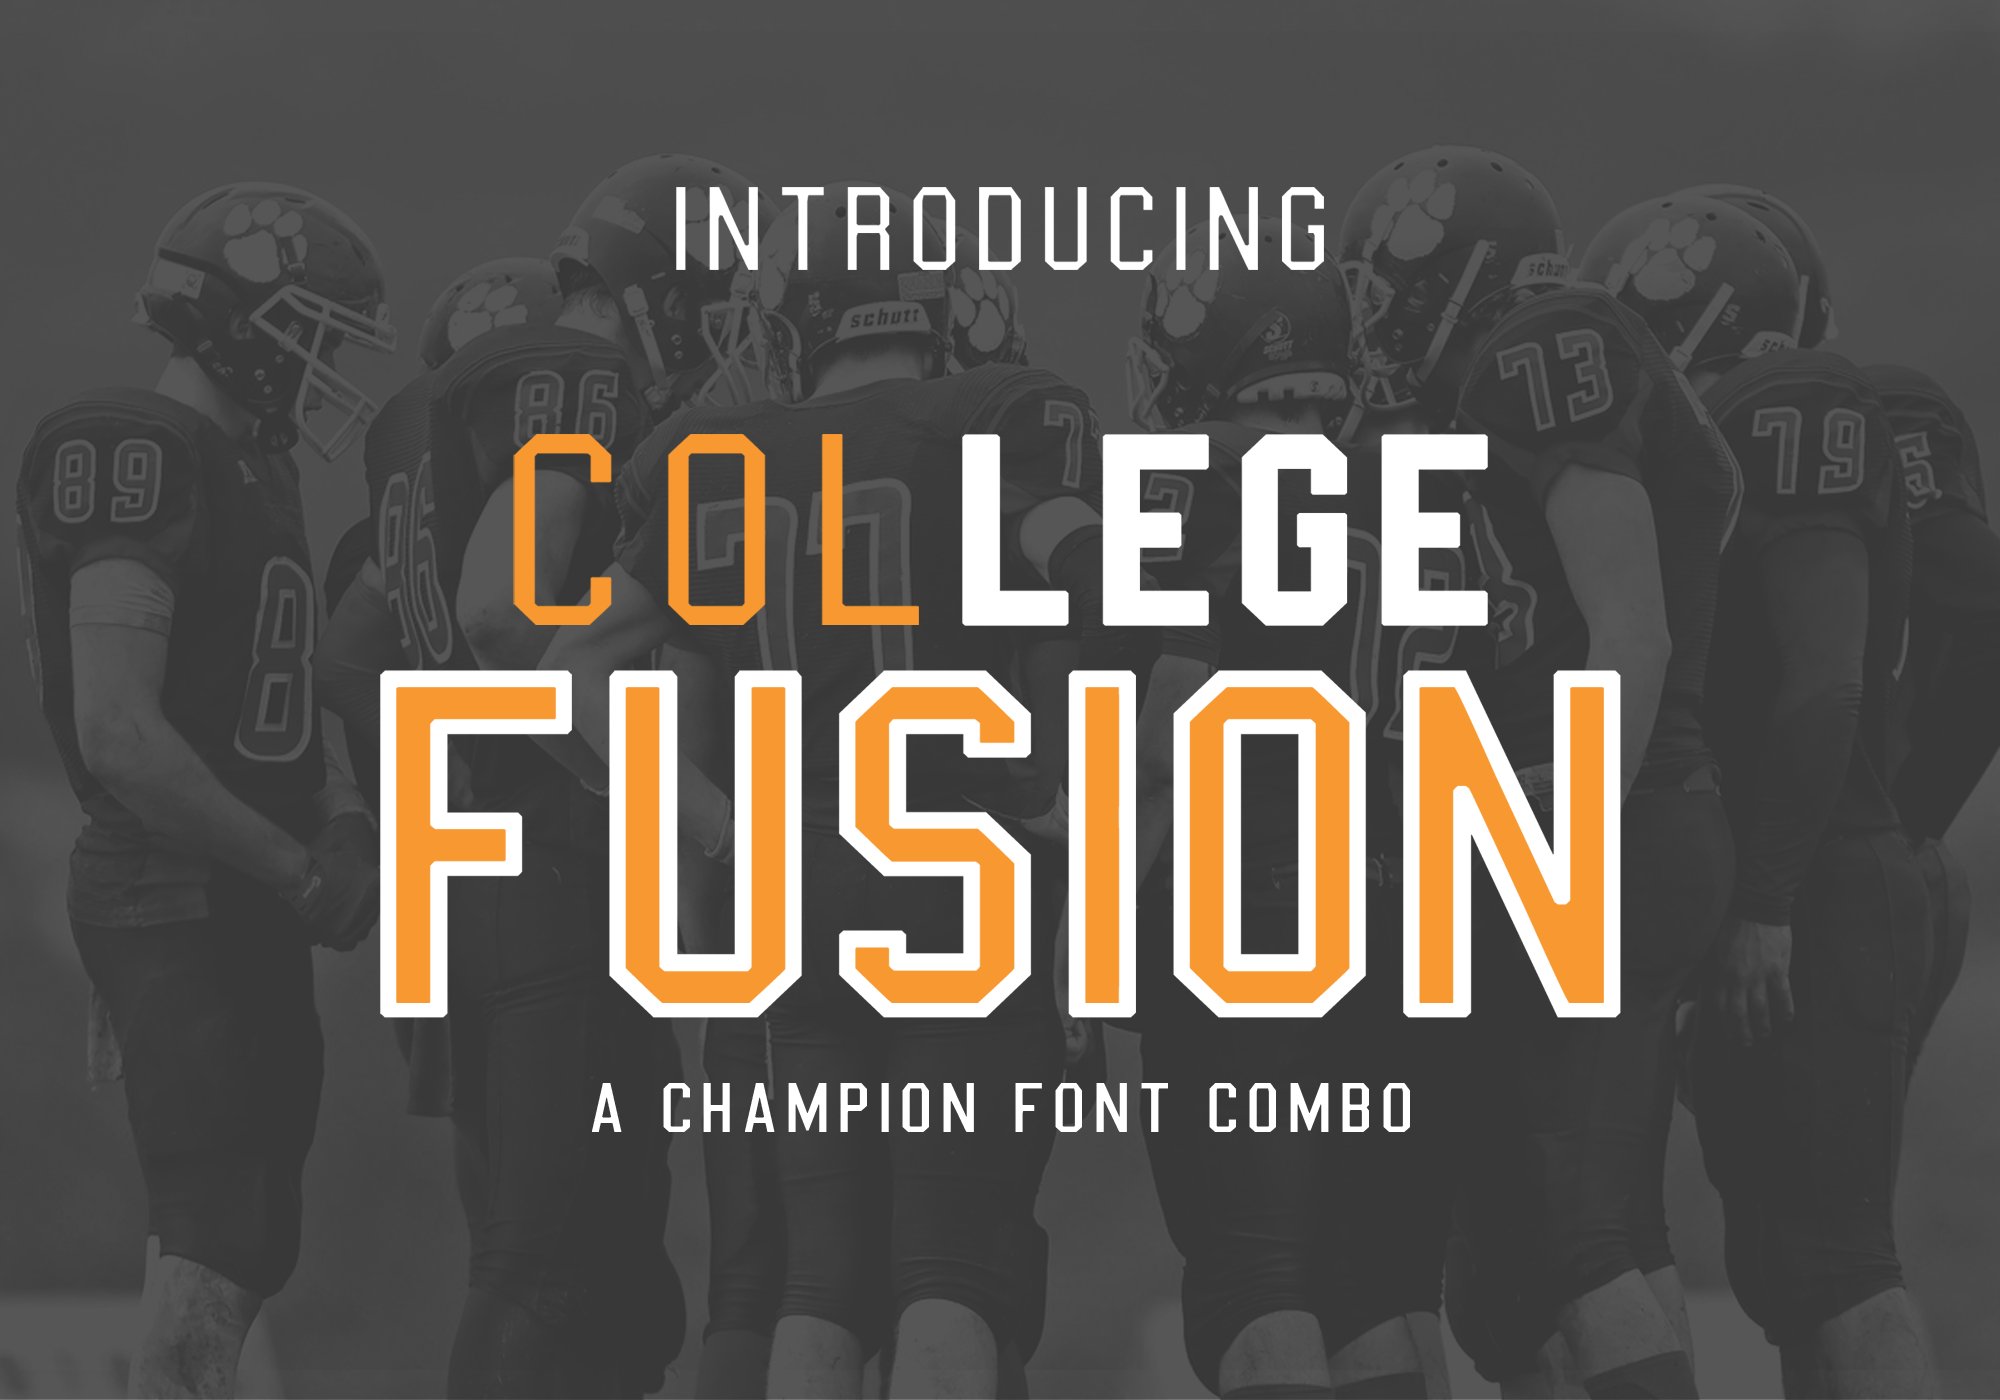 College Fusion Font Combo cover image.